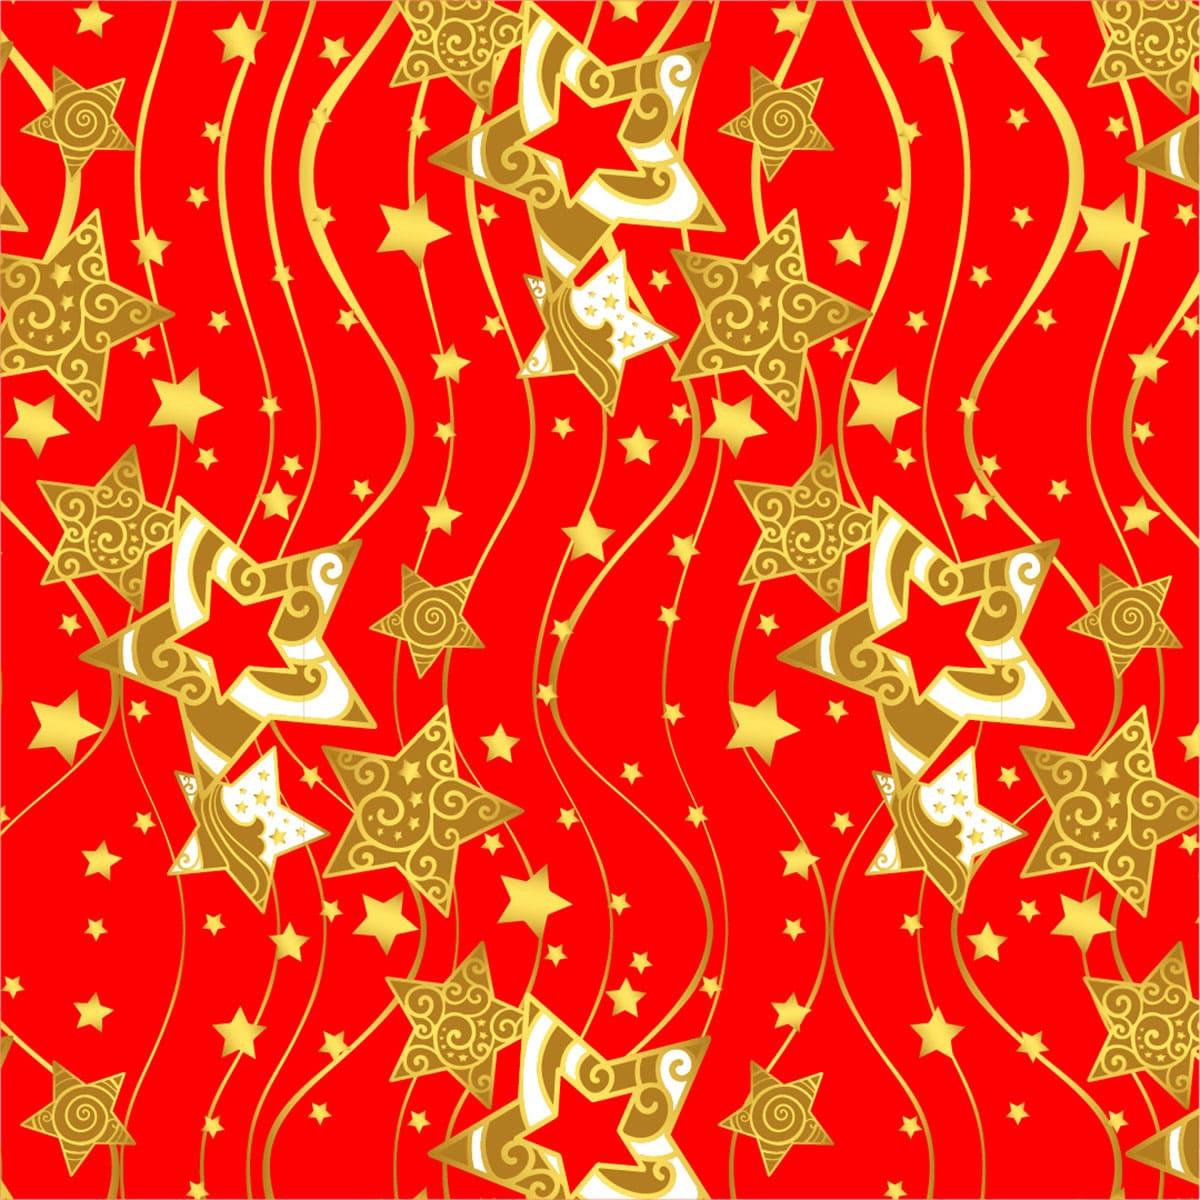 Christmas seamless background: Stars on red